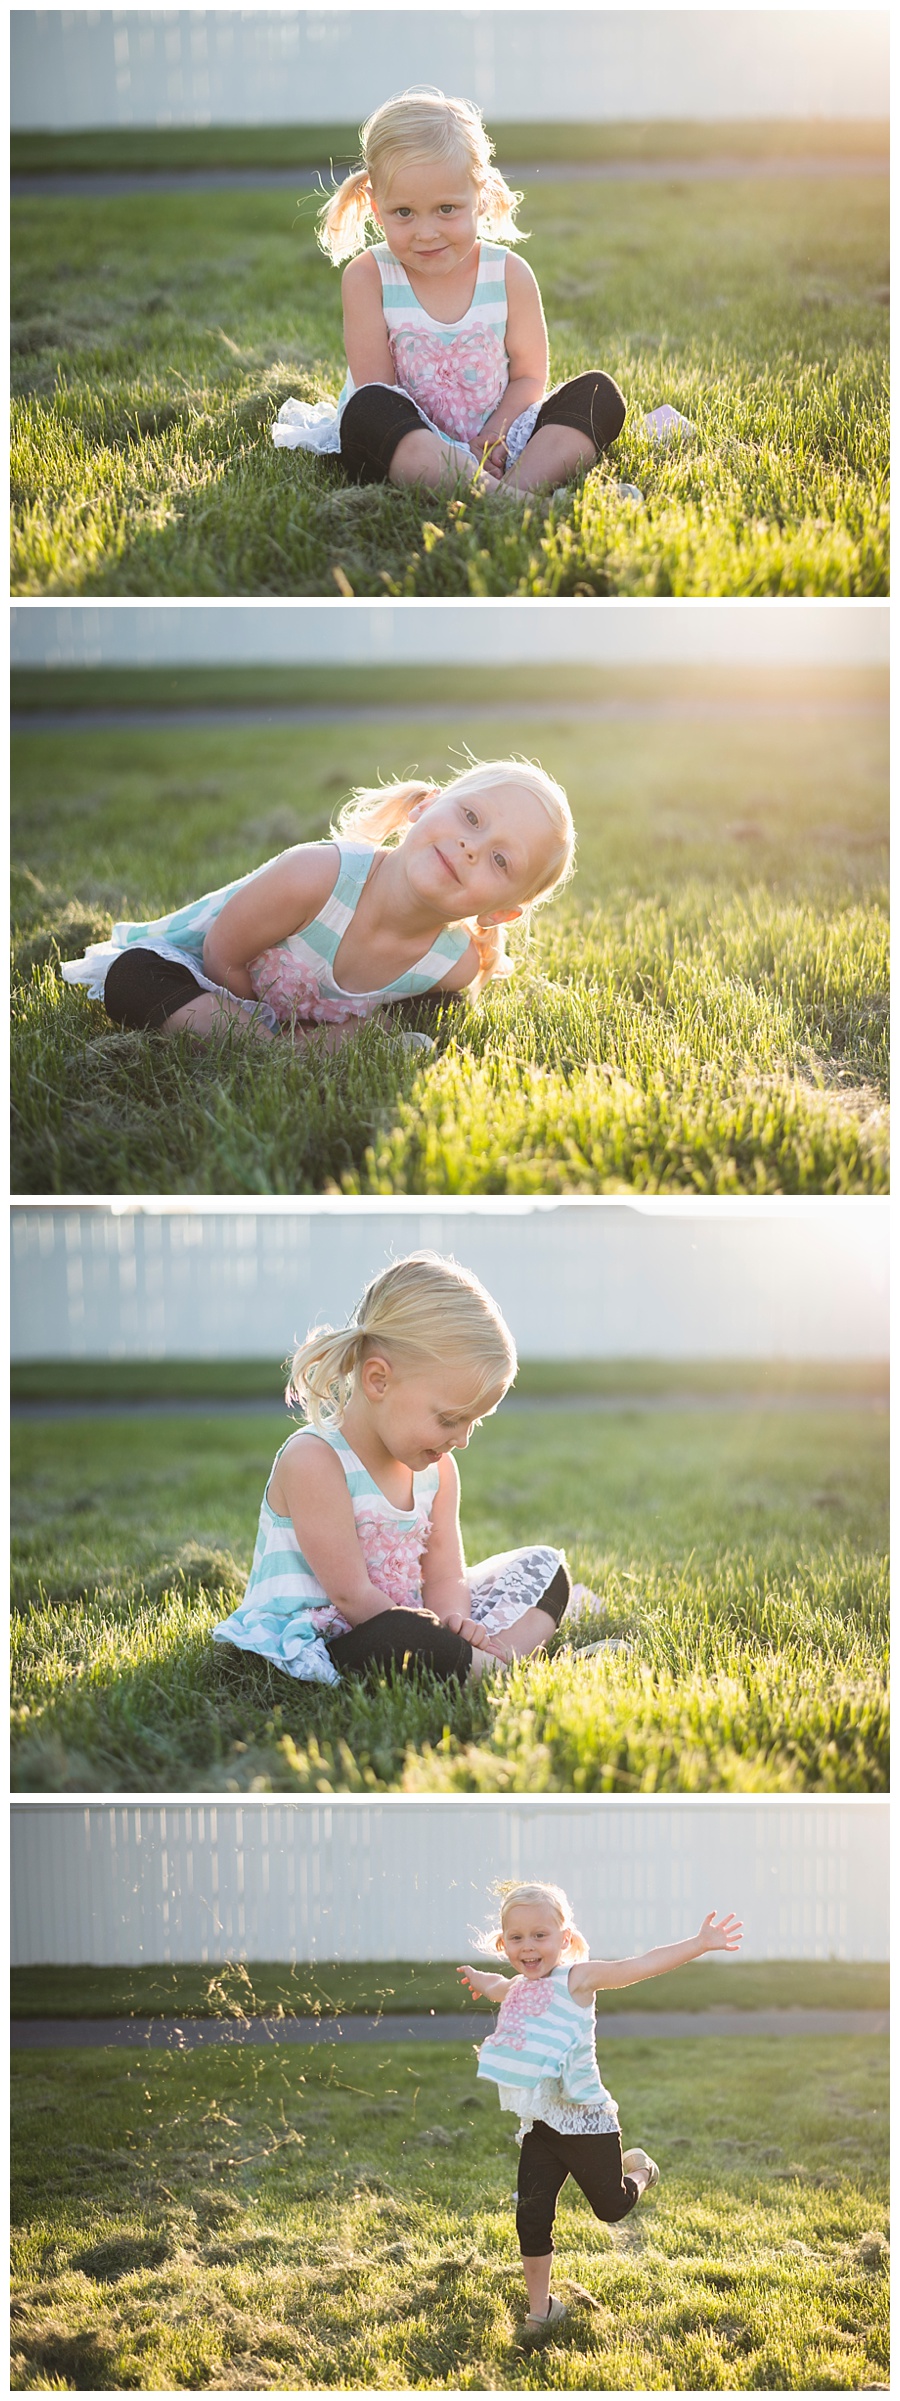 How to photograph an independent child, with Lexi Rae Photography